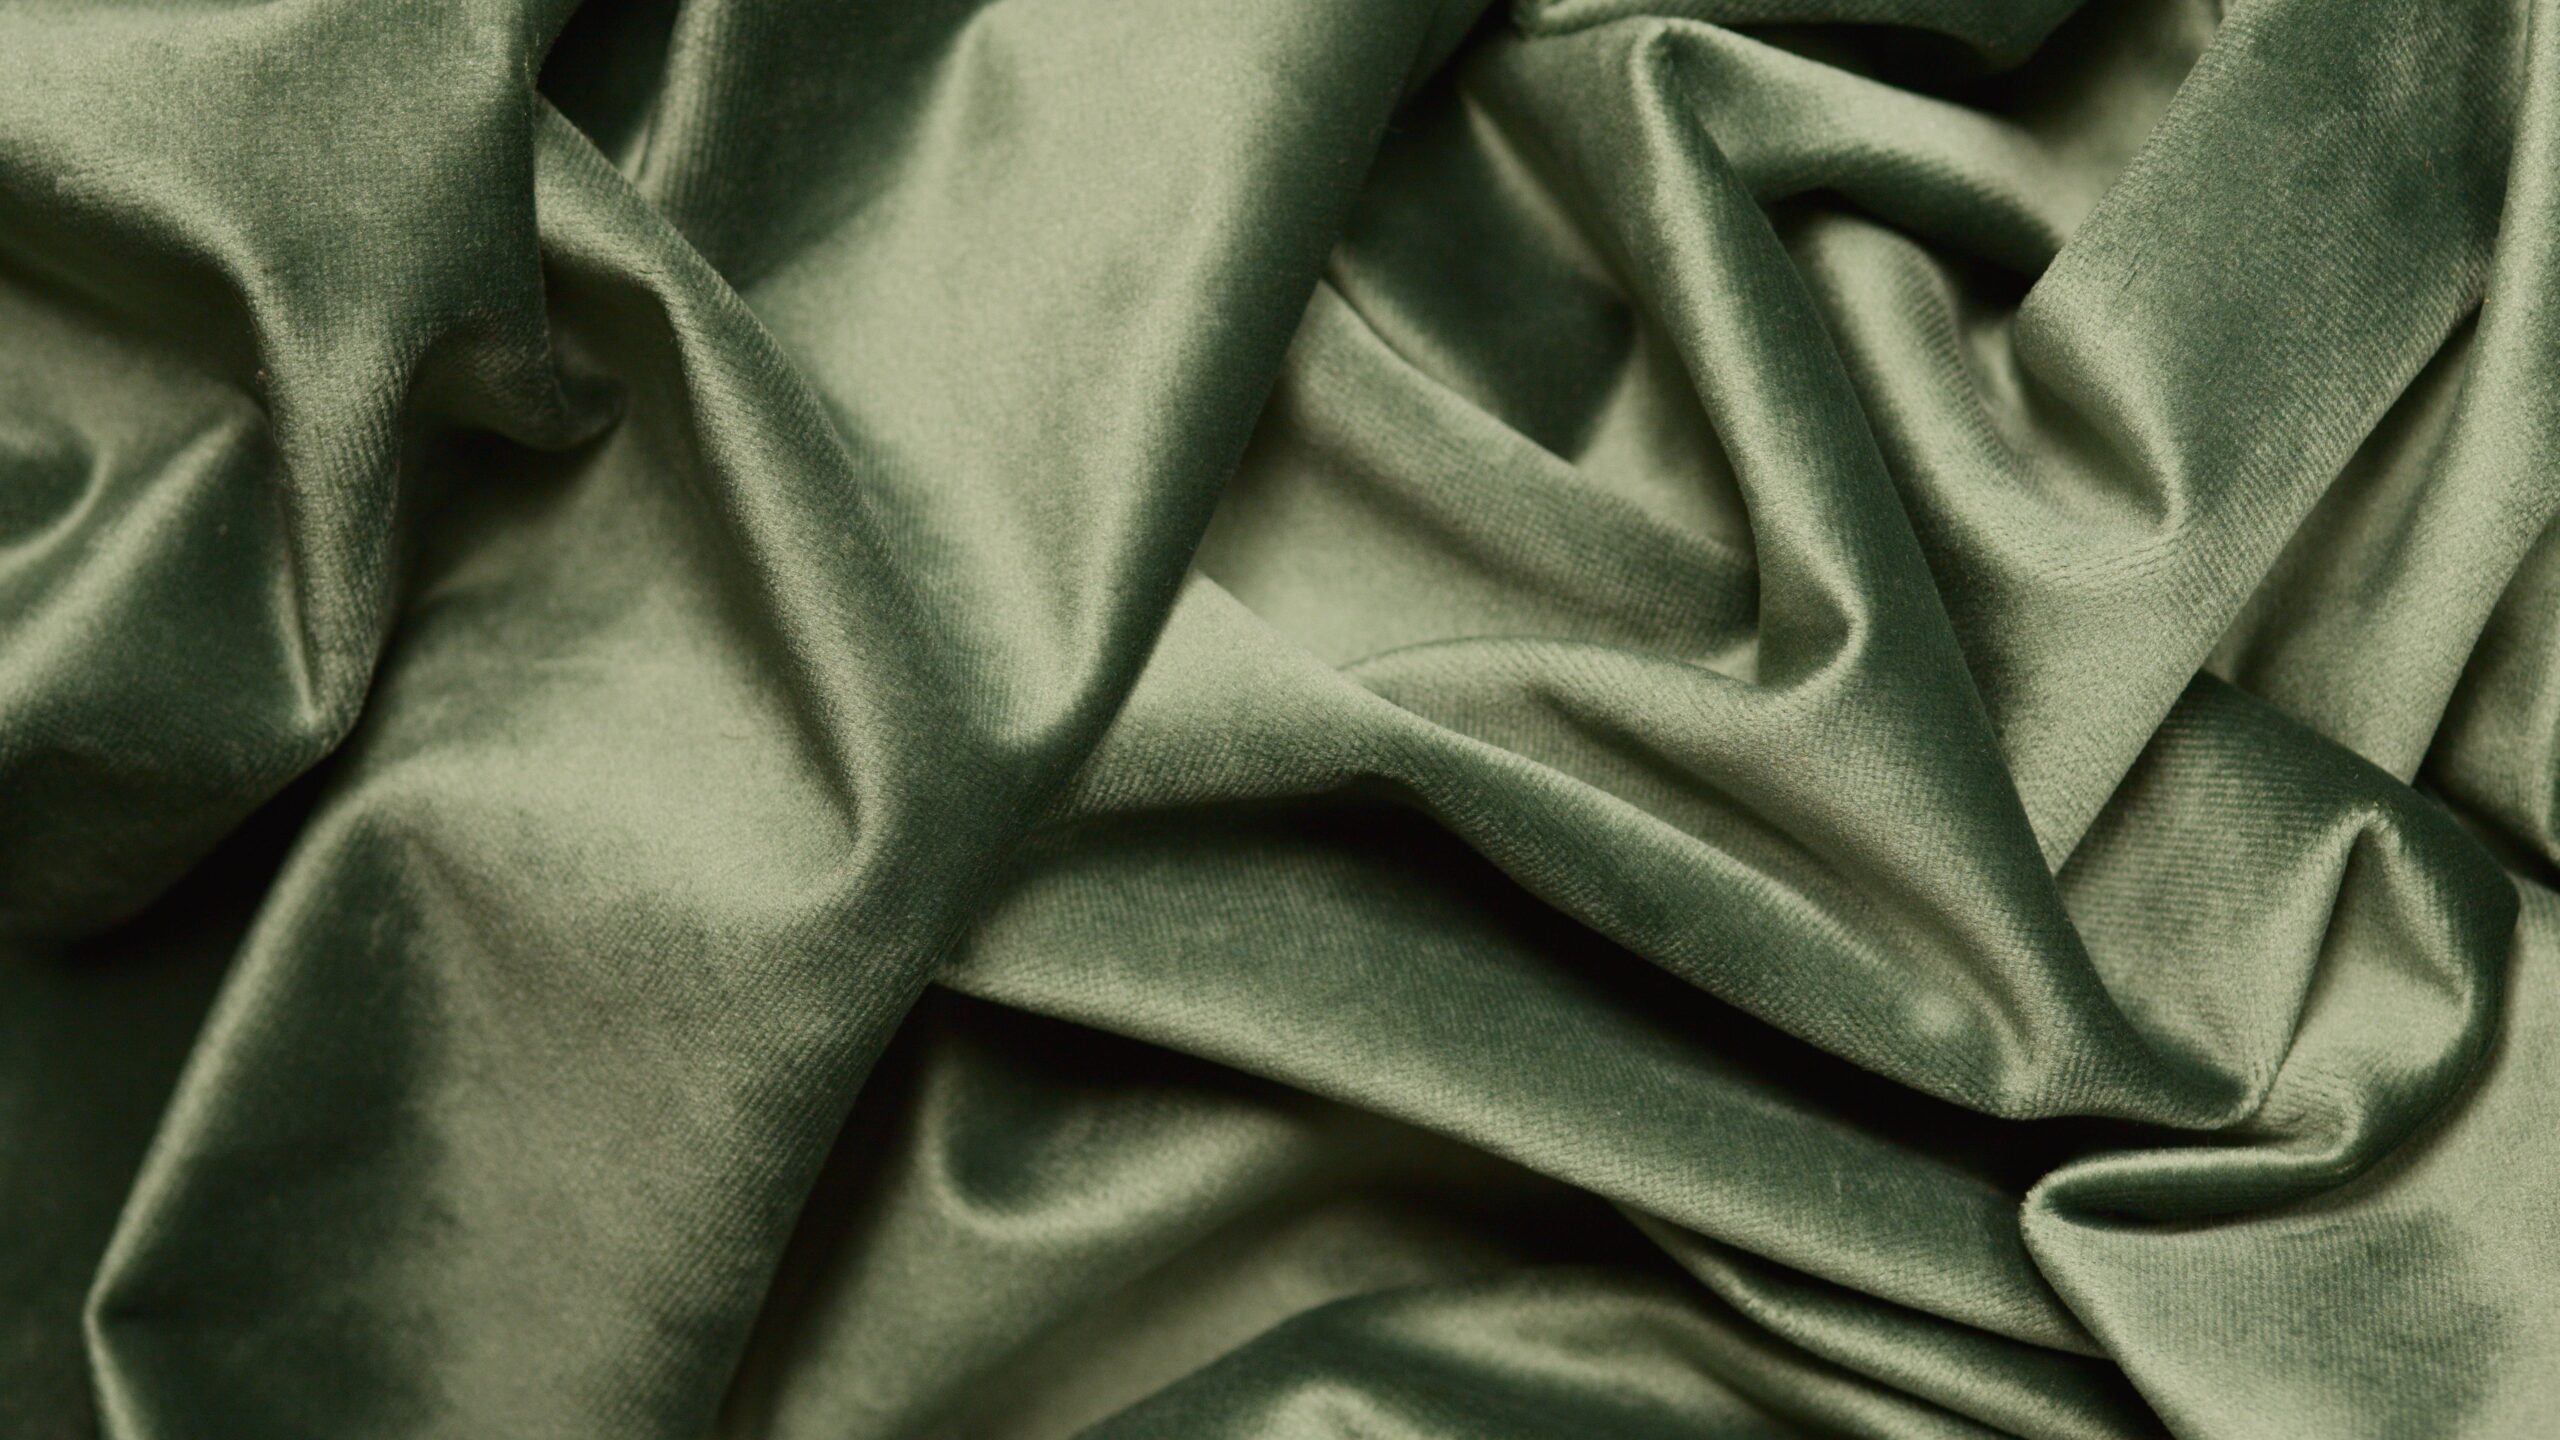 Crumpled green polyster fabric